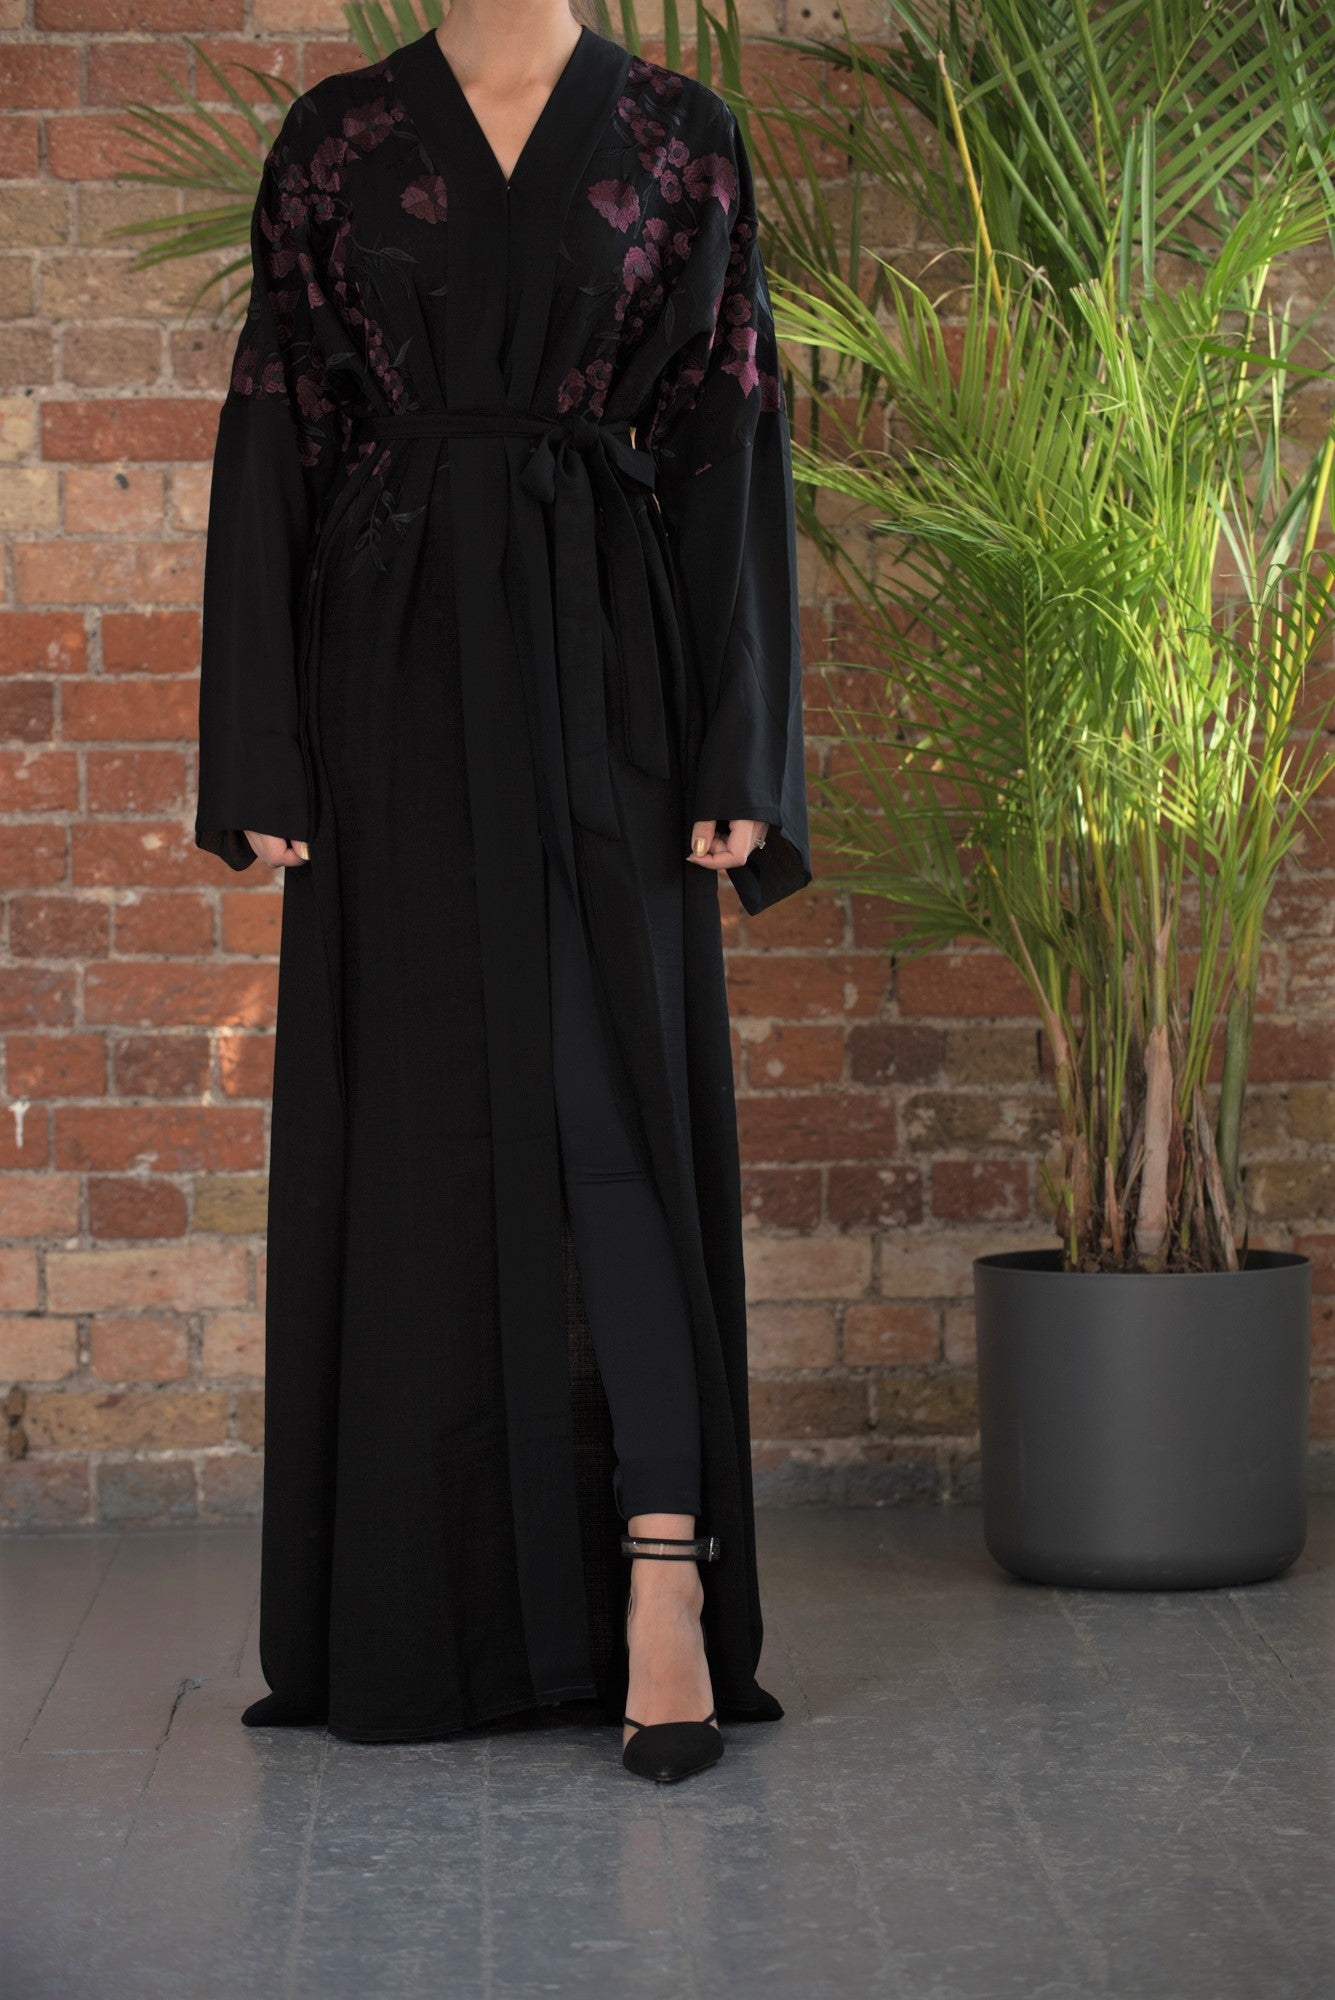 Aaliya Collections A classic black abaya with contrasting burgundy floral embroidery